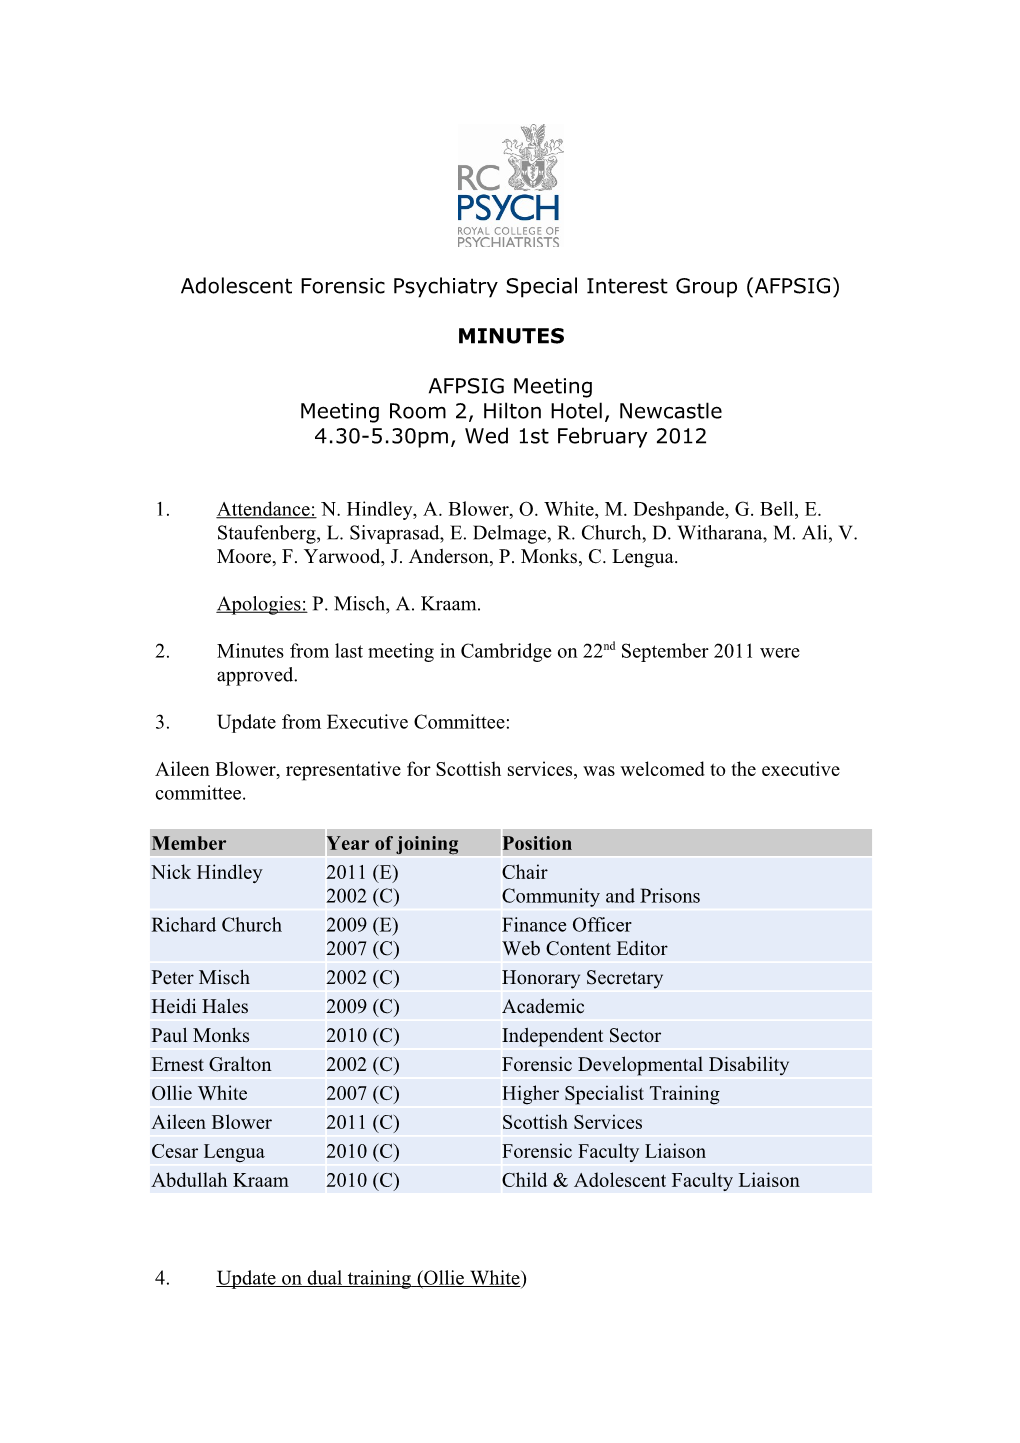 Adolescent Forensic Psychiatryspecial Interest Group (AFPSIG)